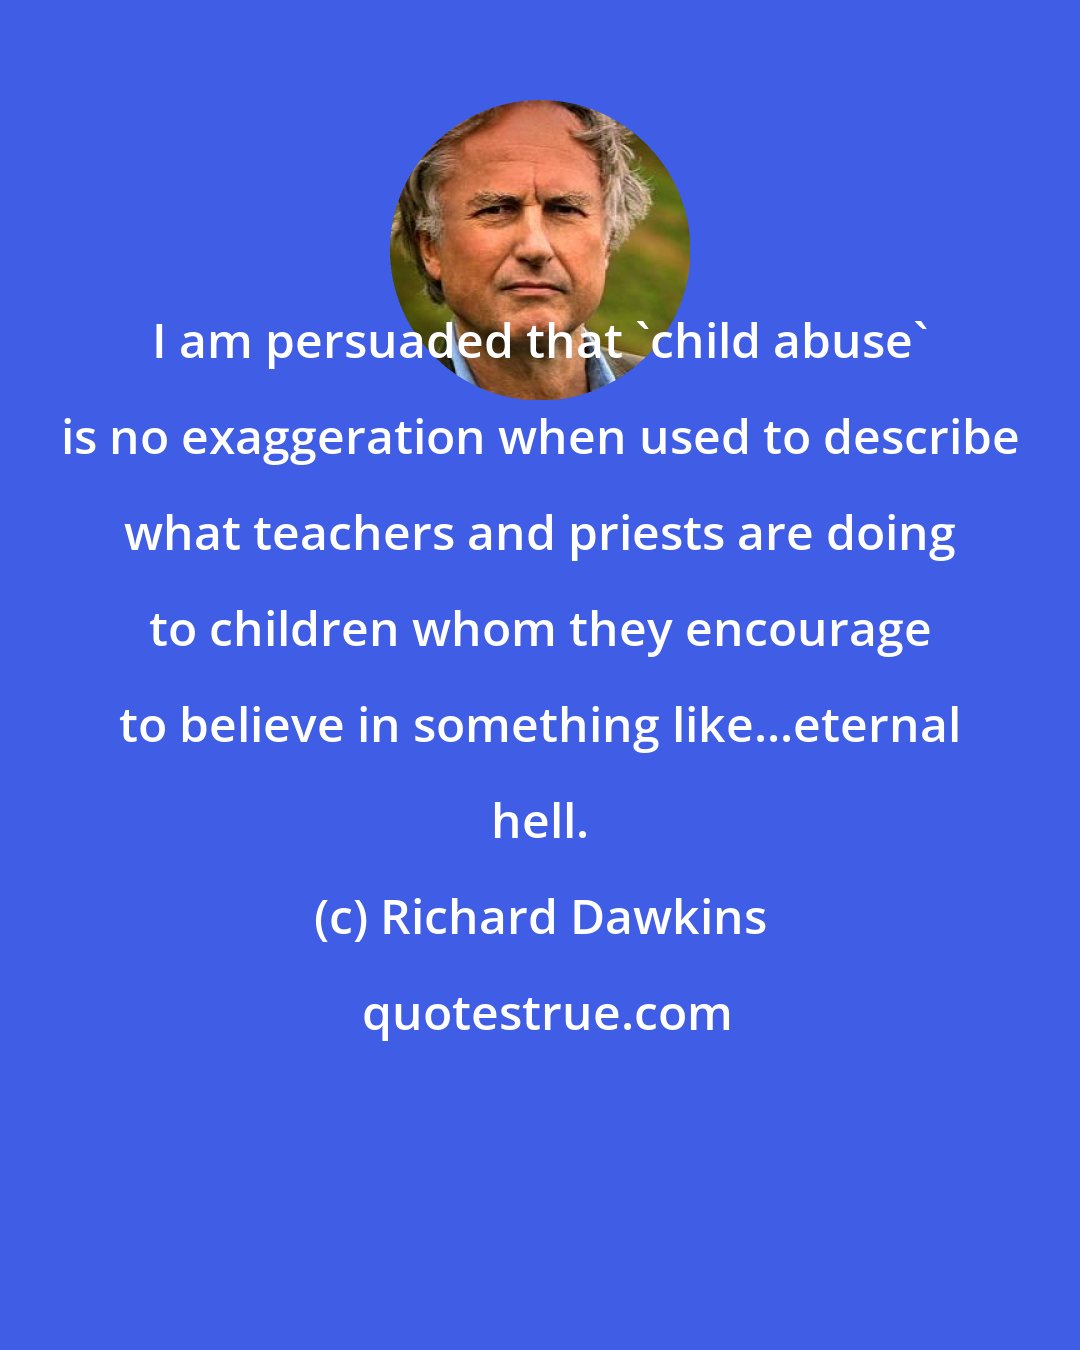 Richard Dawkins: I am persuaded that 'child abuse' is no exaggeration when used to describe what teachers and priests are doing to children whom they encourage to believe in something like...eternal hell.